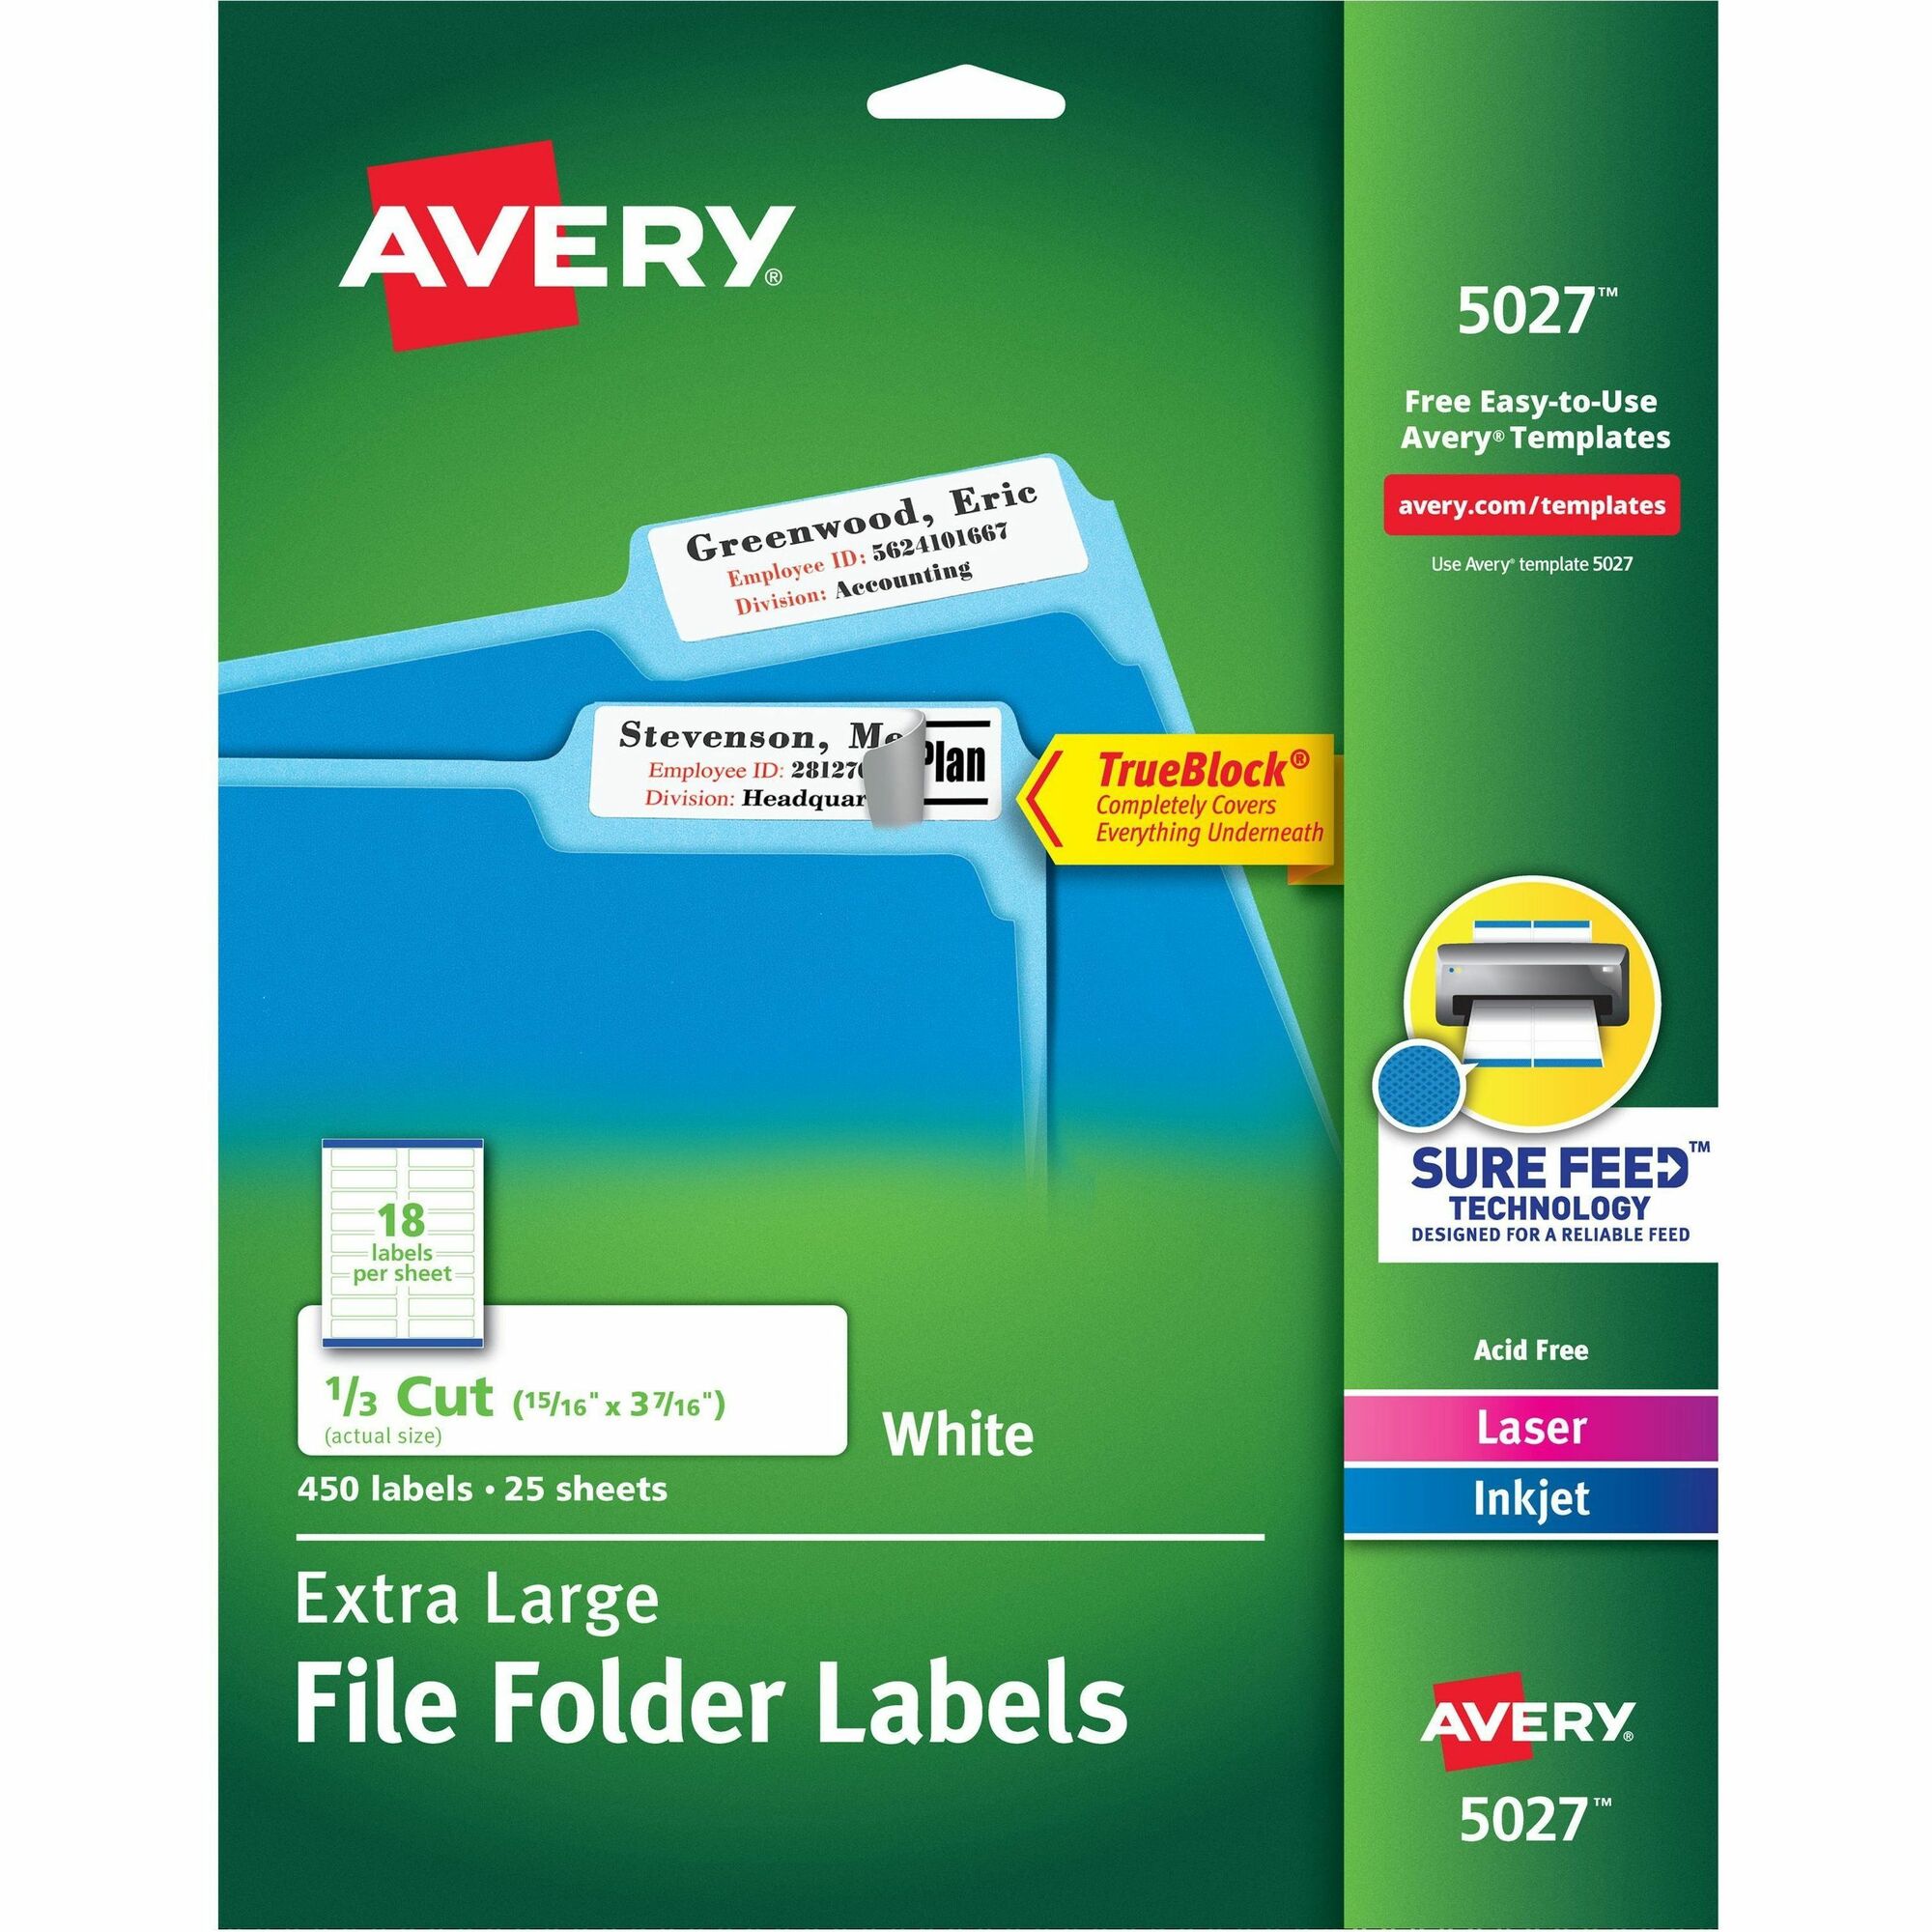 Avery Label Template 11446